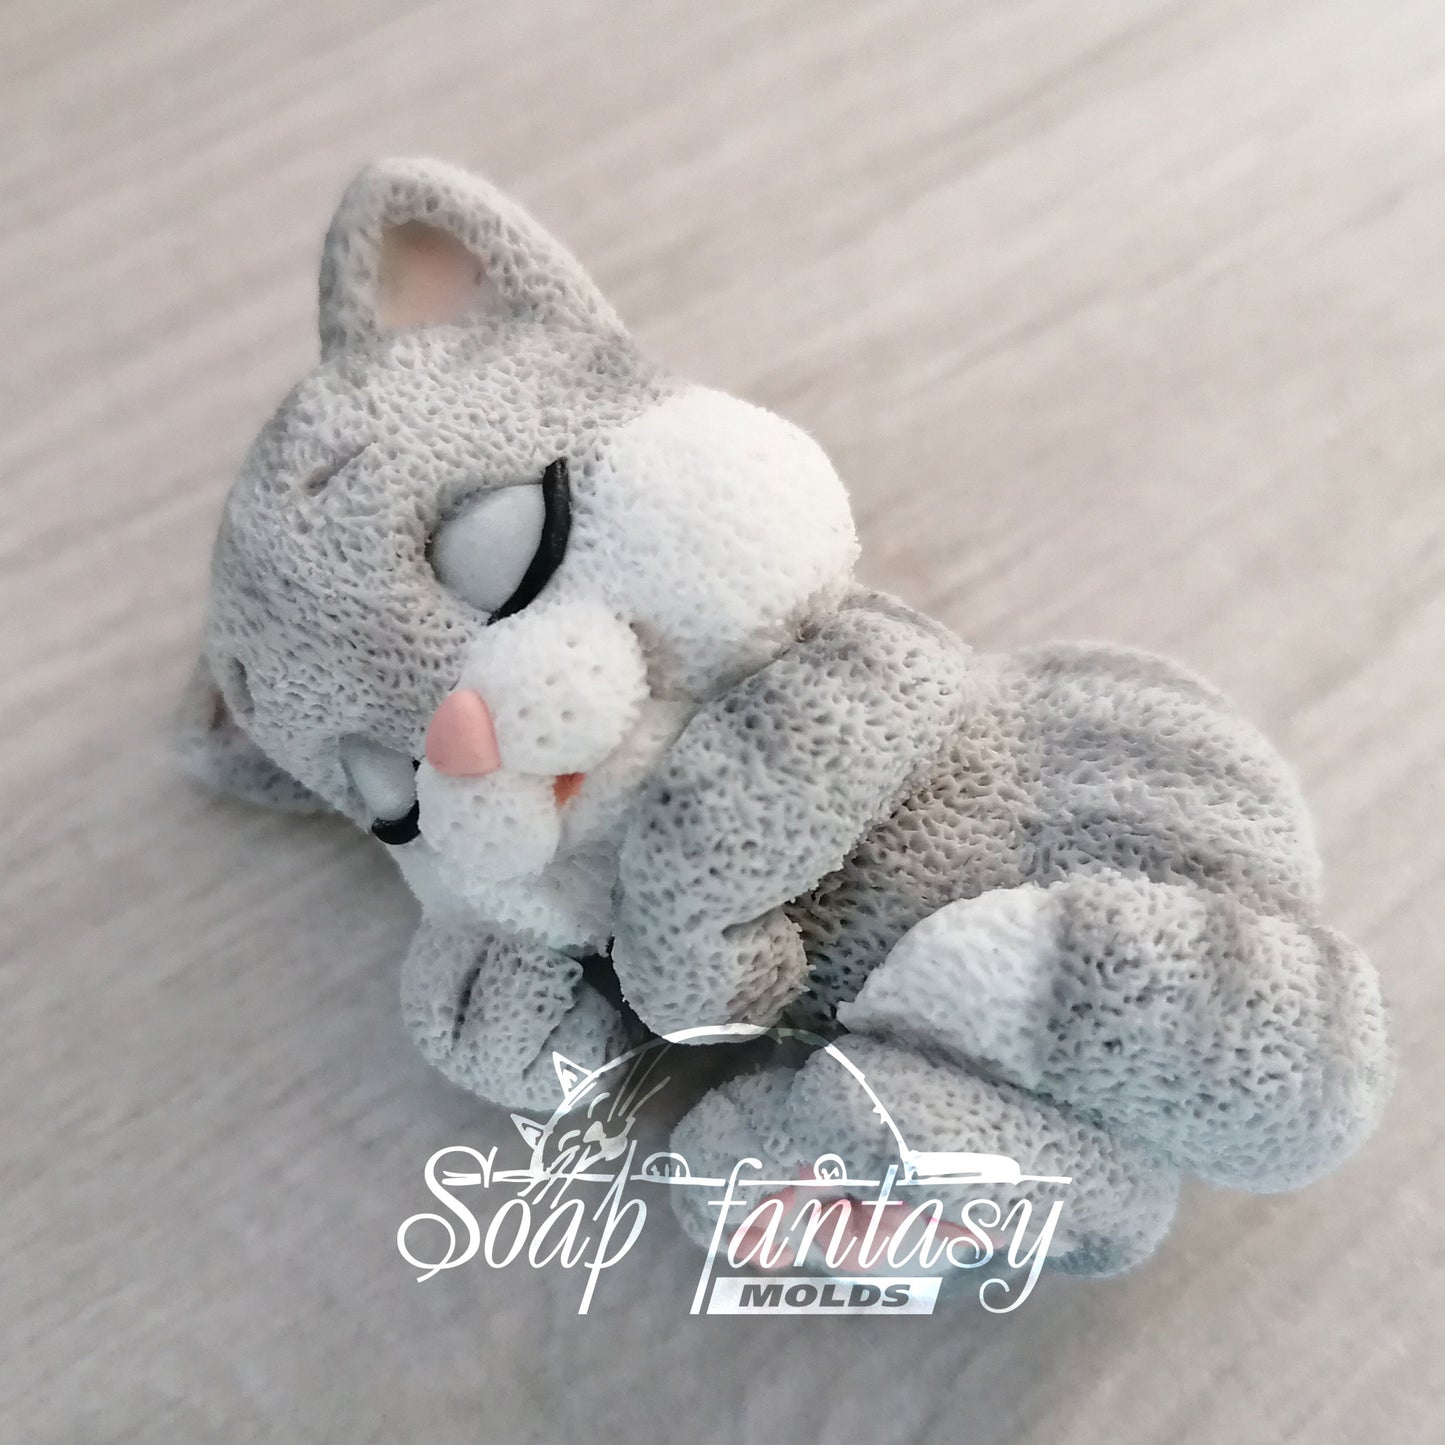 Sleeping kitten purr-purr silicone mold for soap making